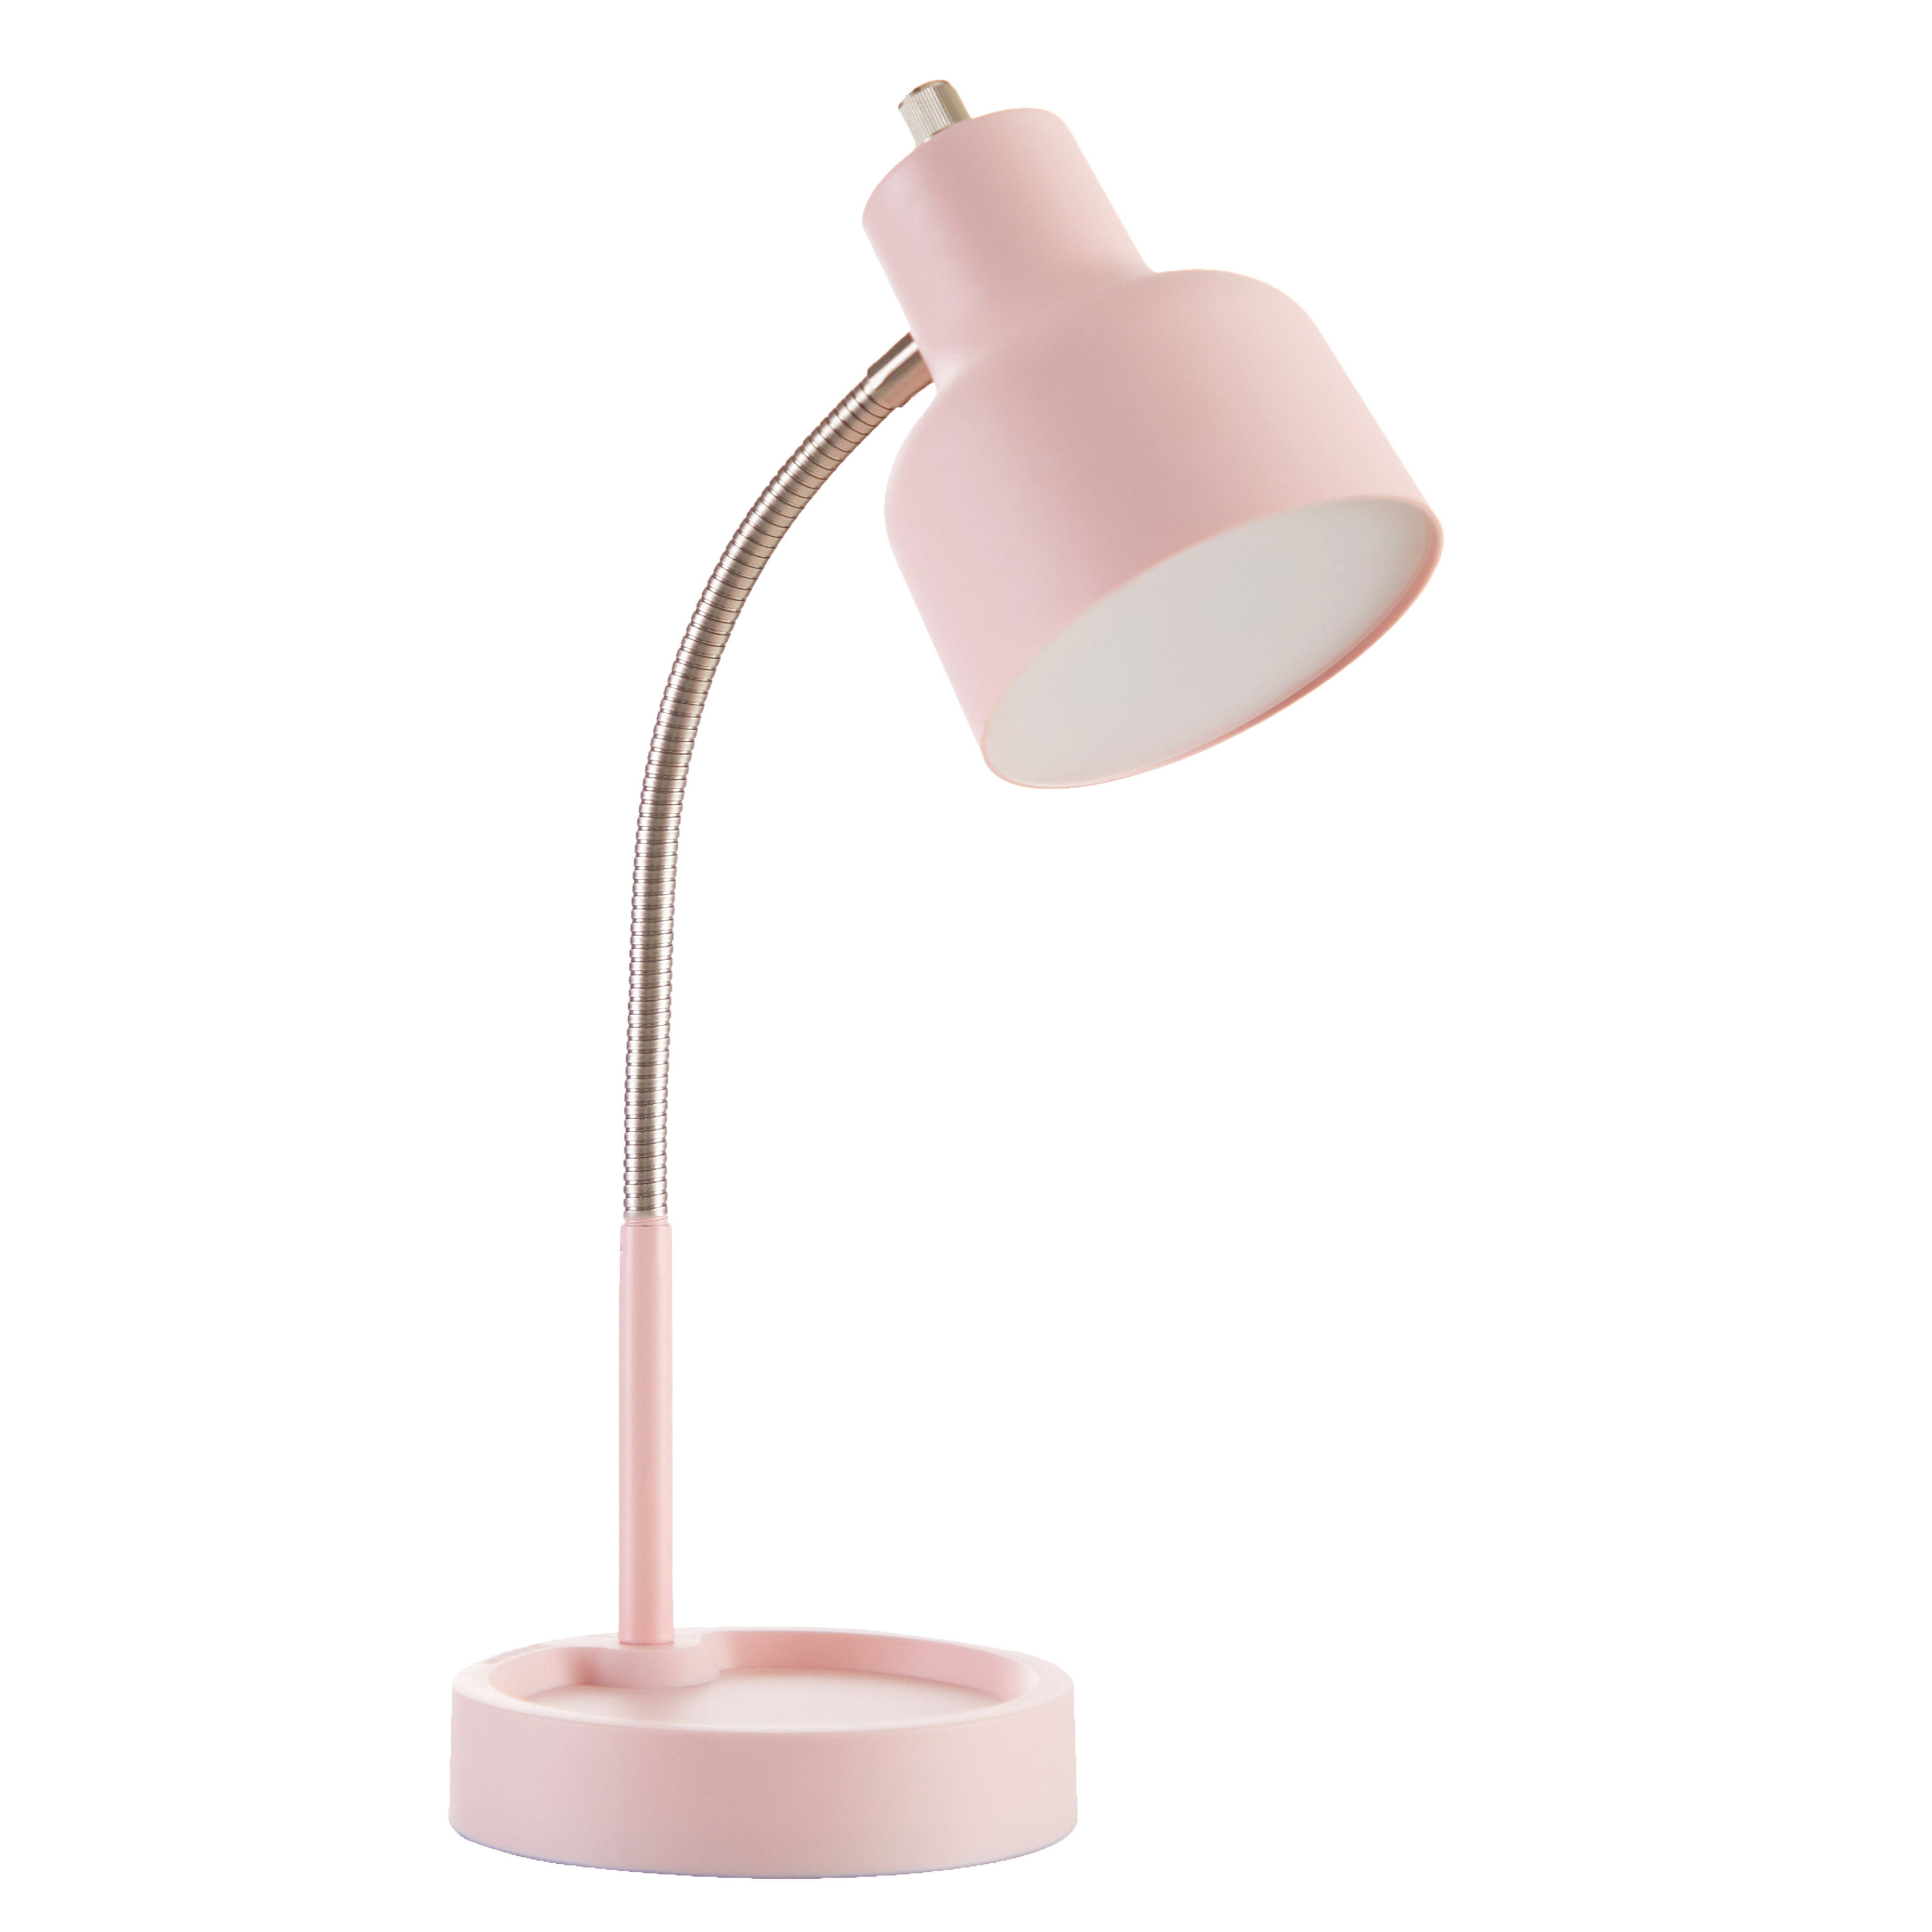 Mainstays LED Desk Lamp with Catch-All Base & AC Outlet, Matte Blush Pink - image 1 of 10